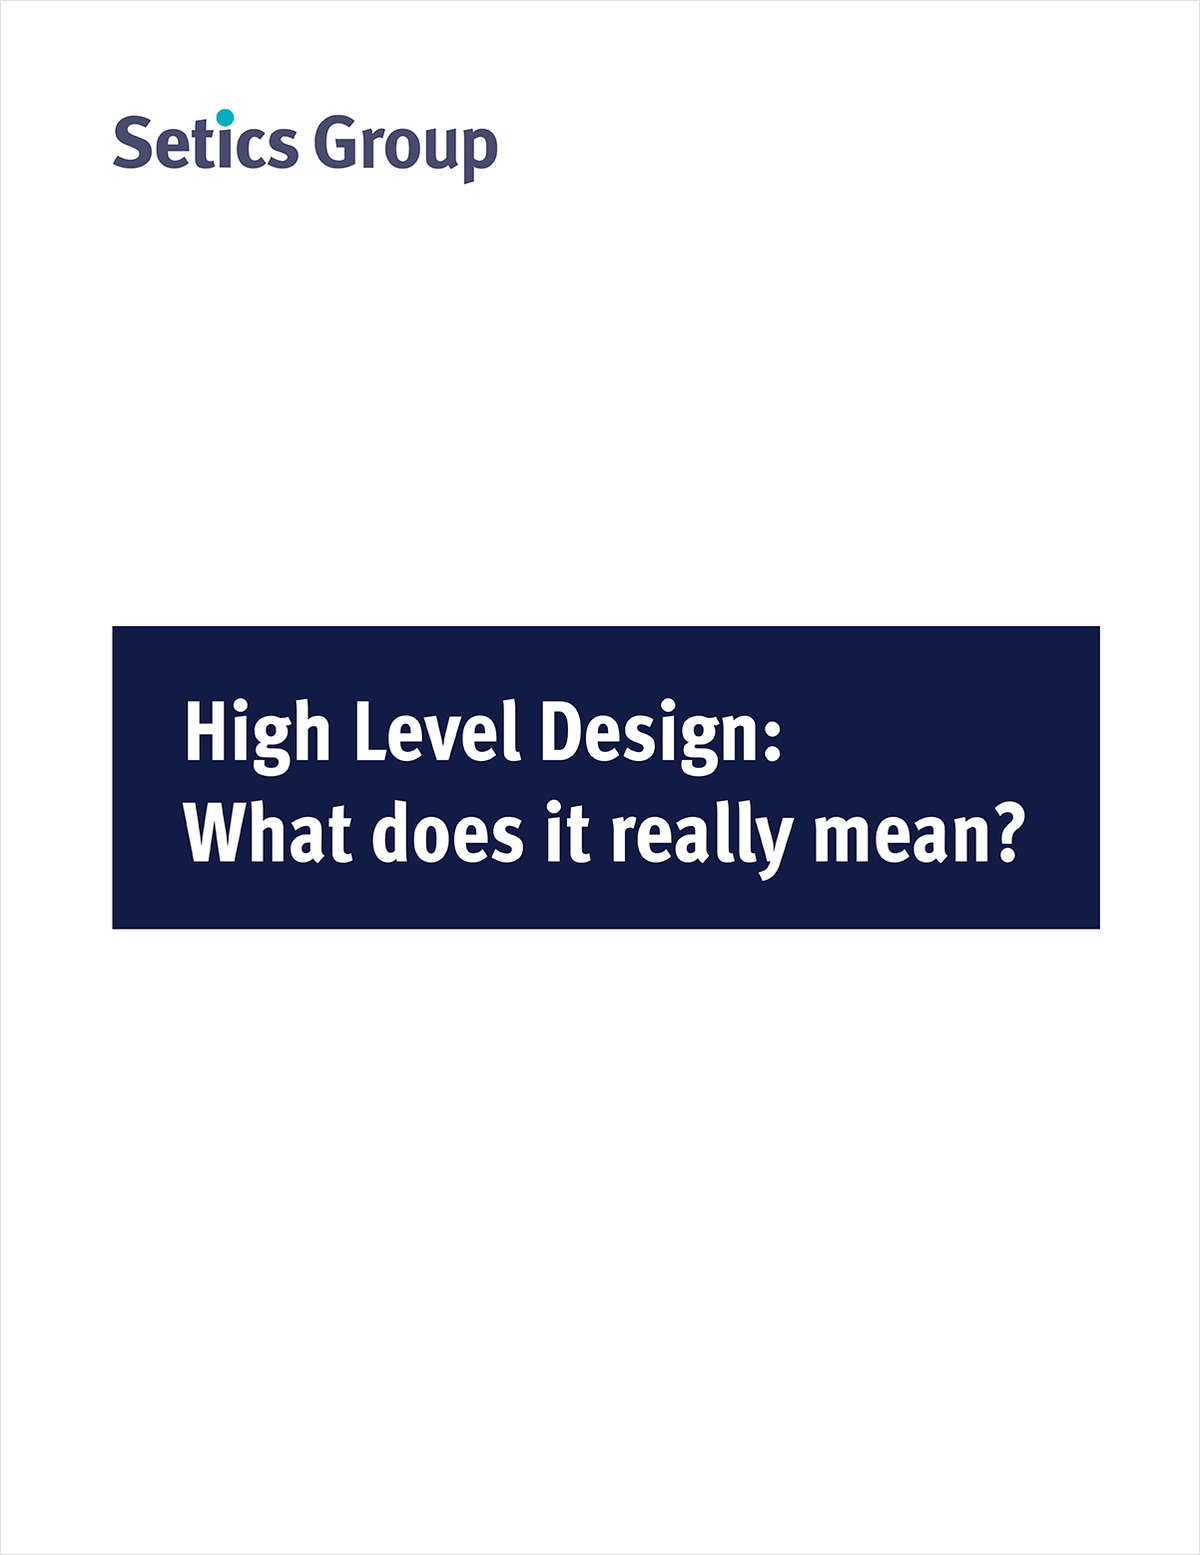 High Level Design - What does it really mean?